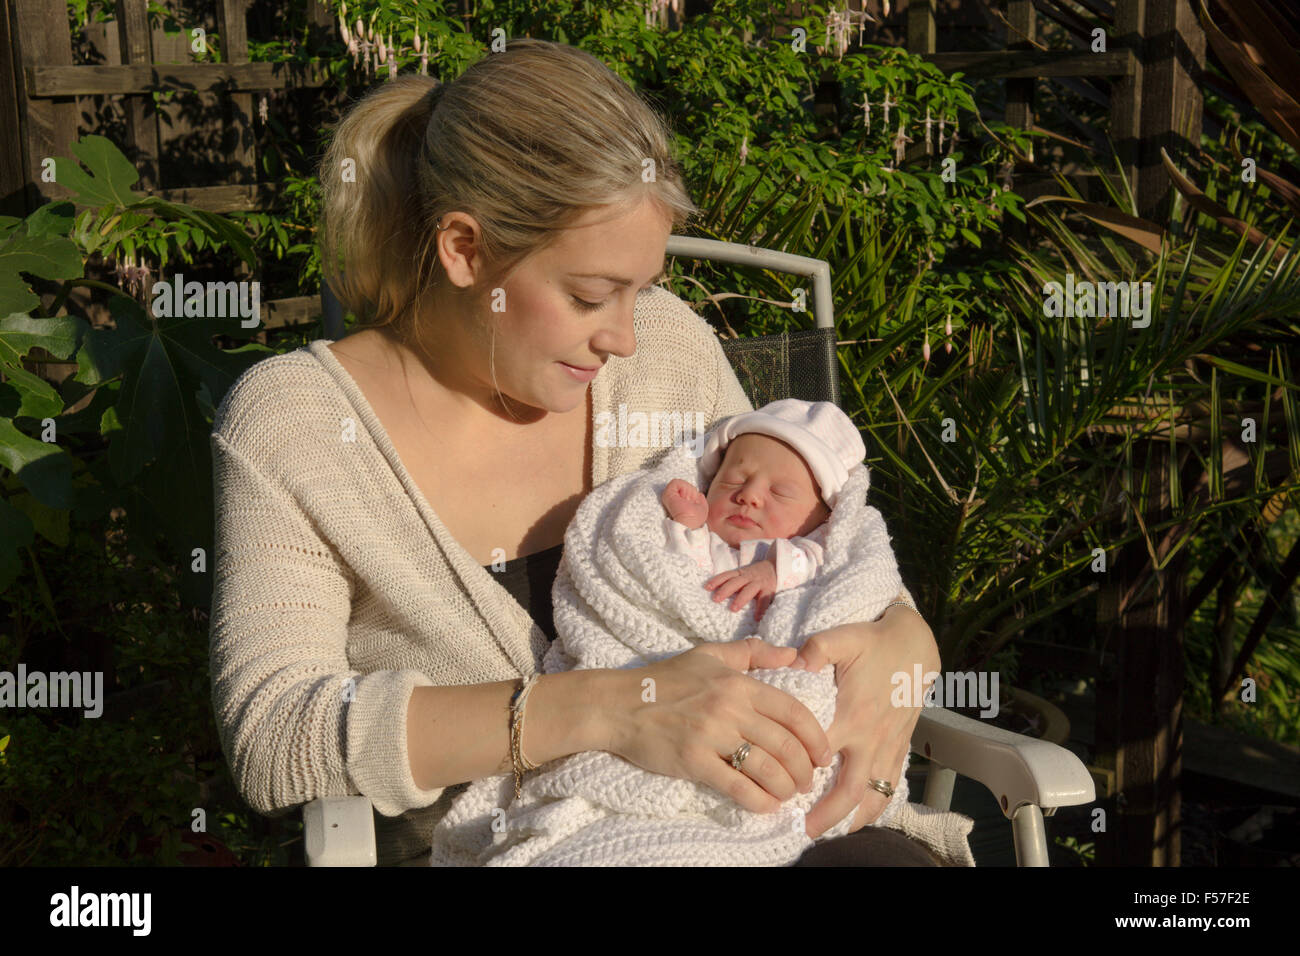 Mother with one day old baby girl sitting in sunshine. Baby slightly jaundiced. UK. Stock Photo